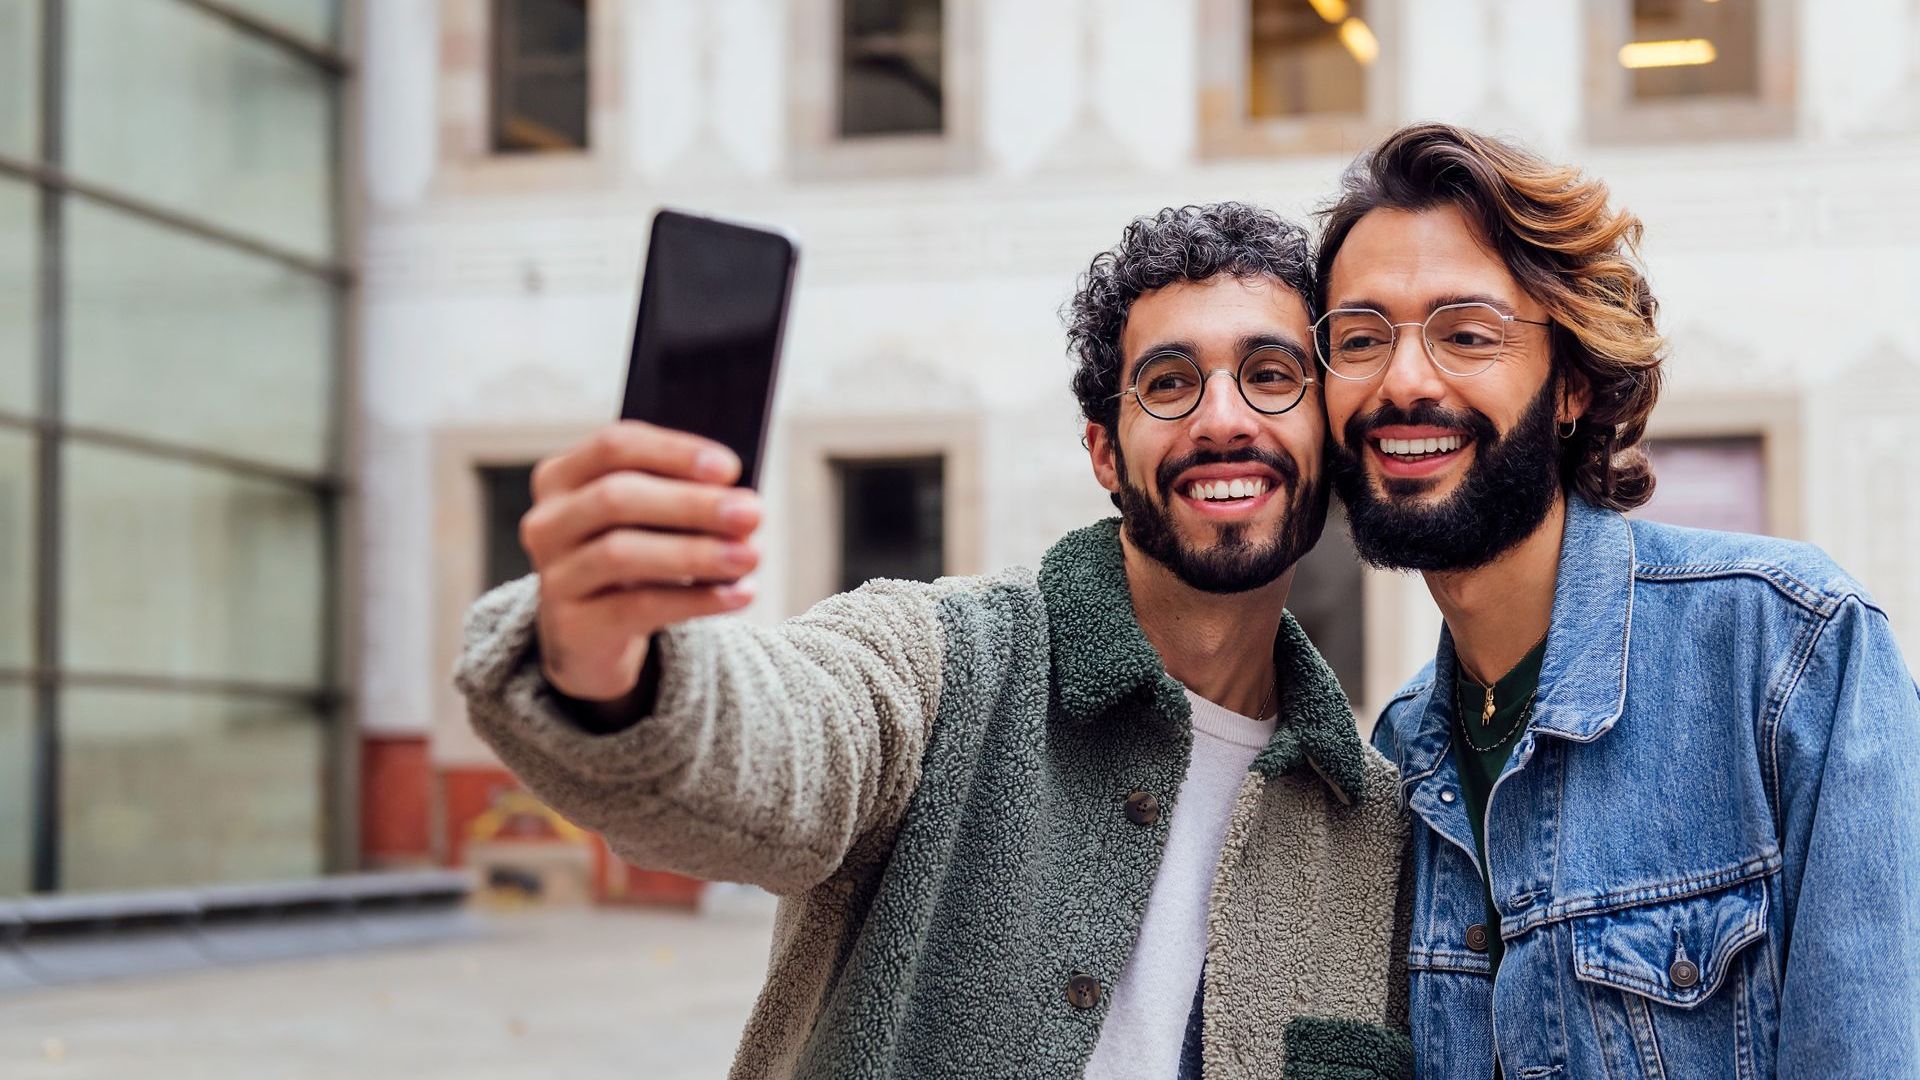 Two men are taking a selfie with a cell phone.